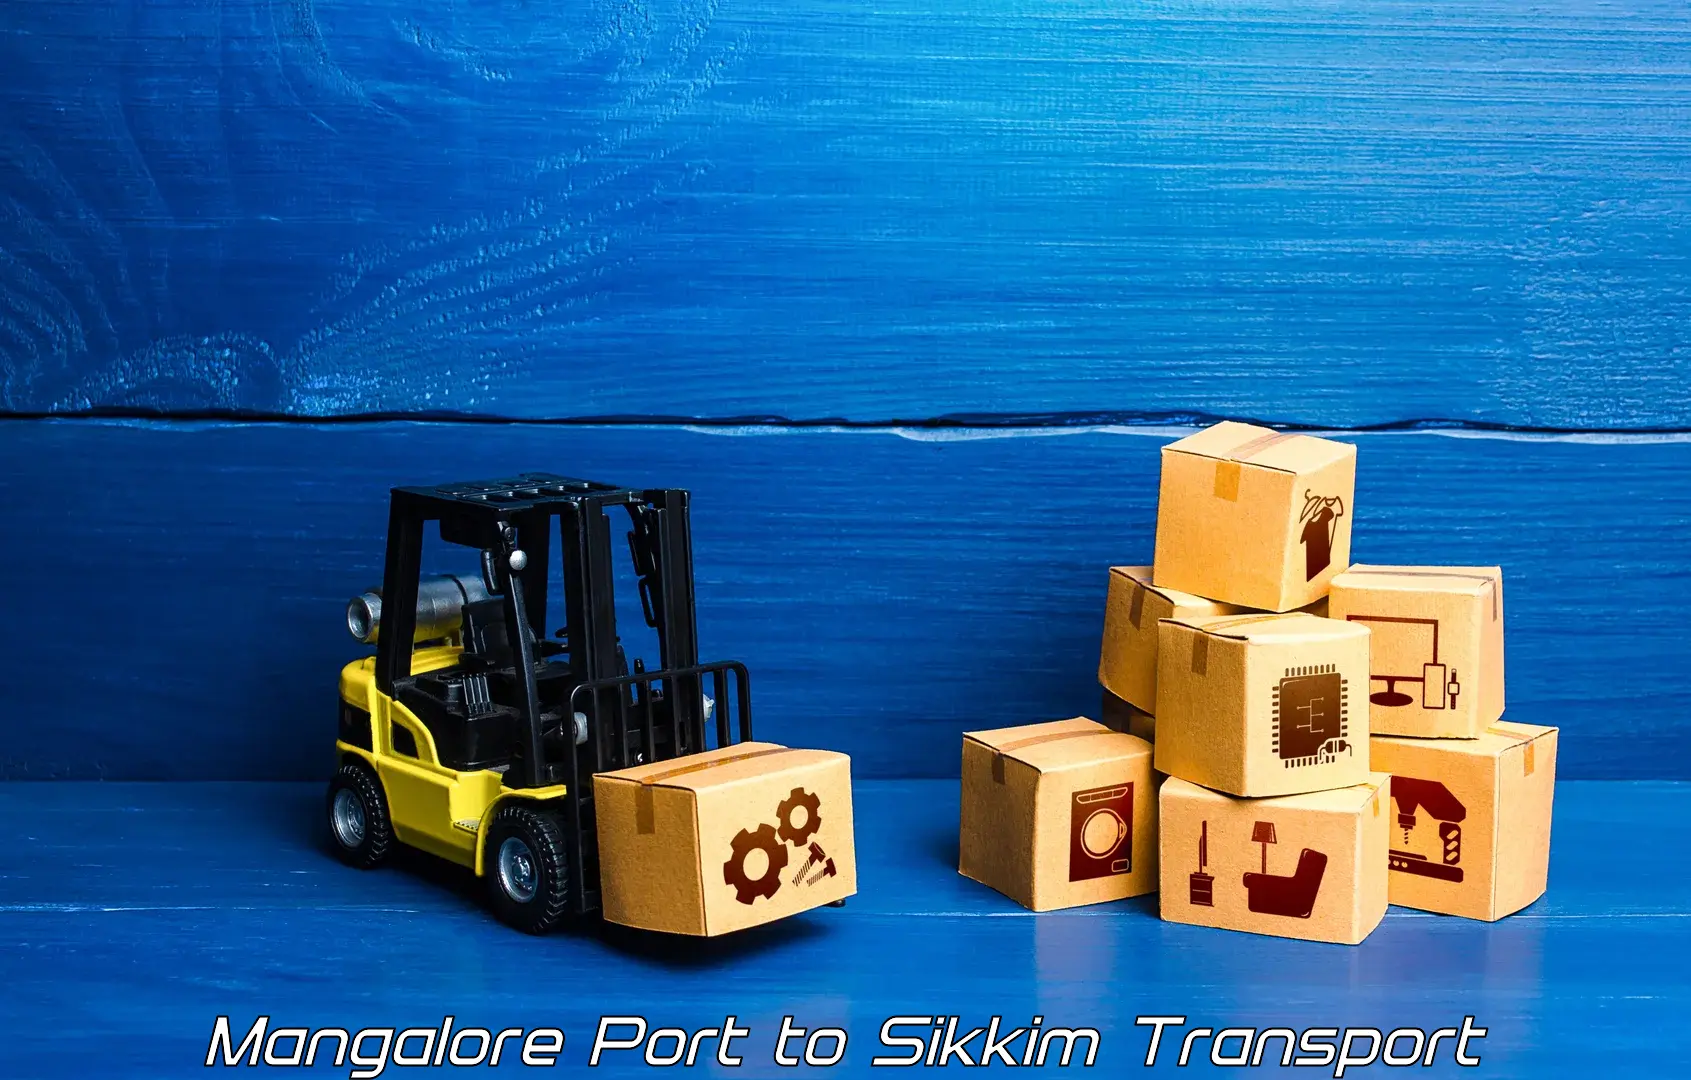 Two wheeler parcel service Mangalore Port to Sikkim